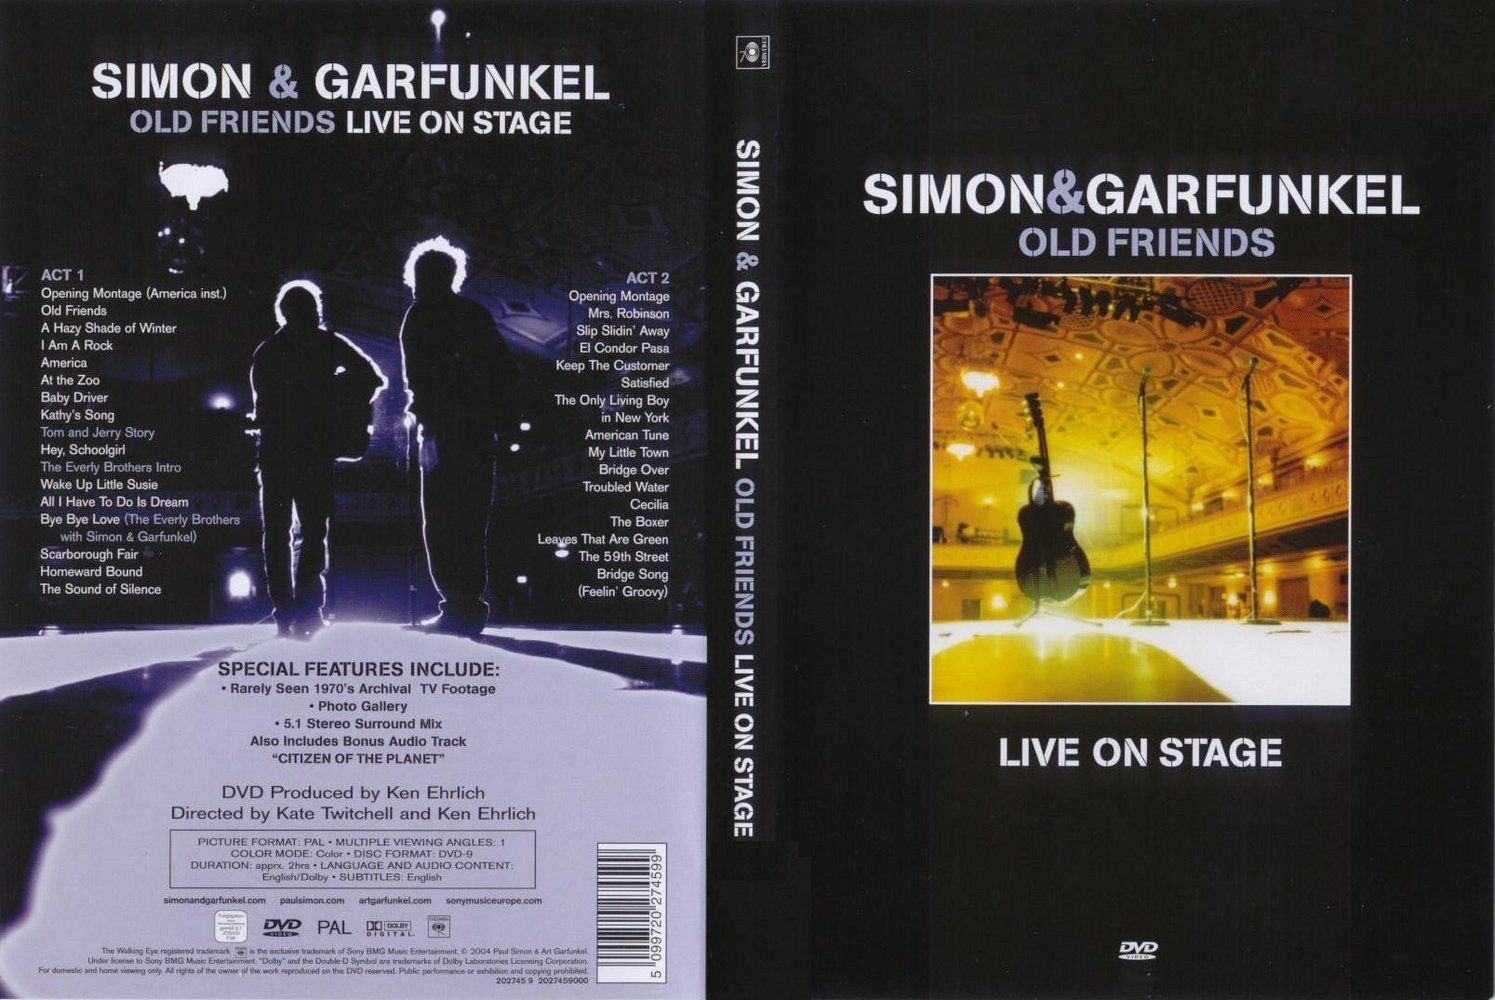 Simon and Garfunkel Old Friends Live On Stage DVD | DVD Covers | Cover Century | Over 1.000.000 Album Art covers for free